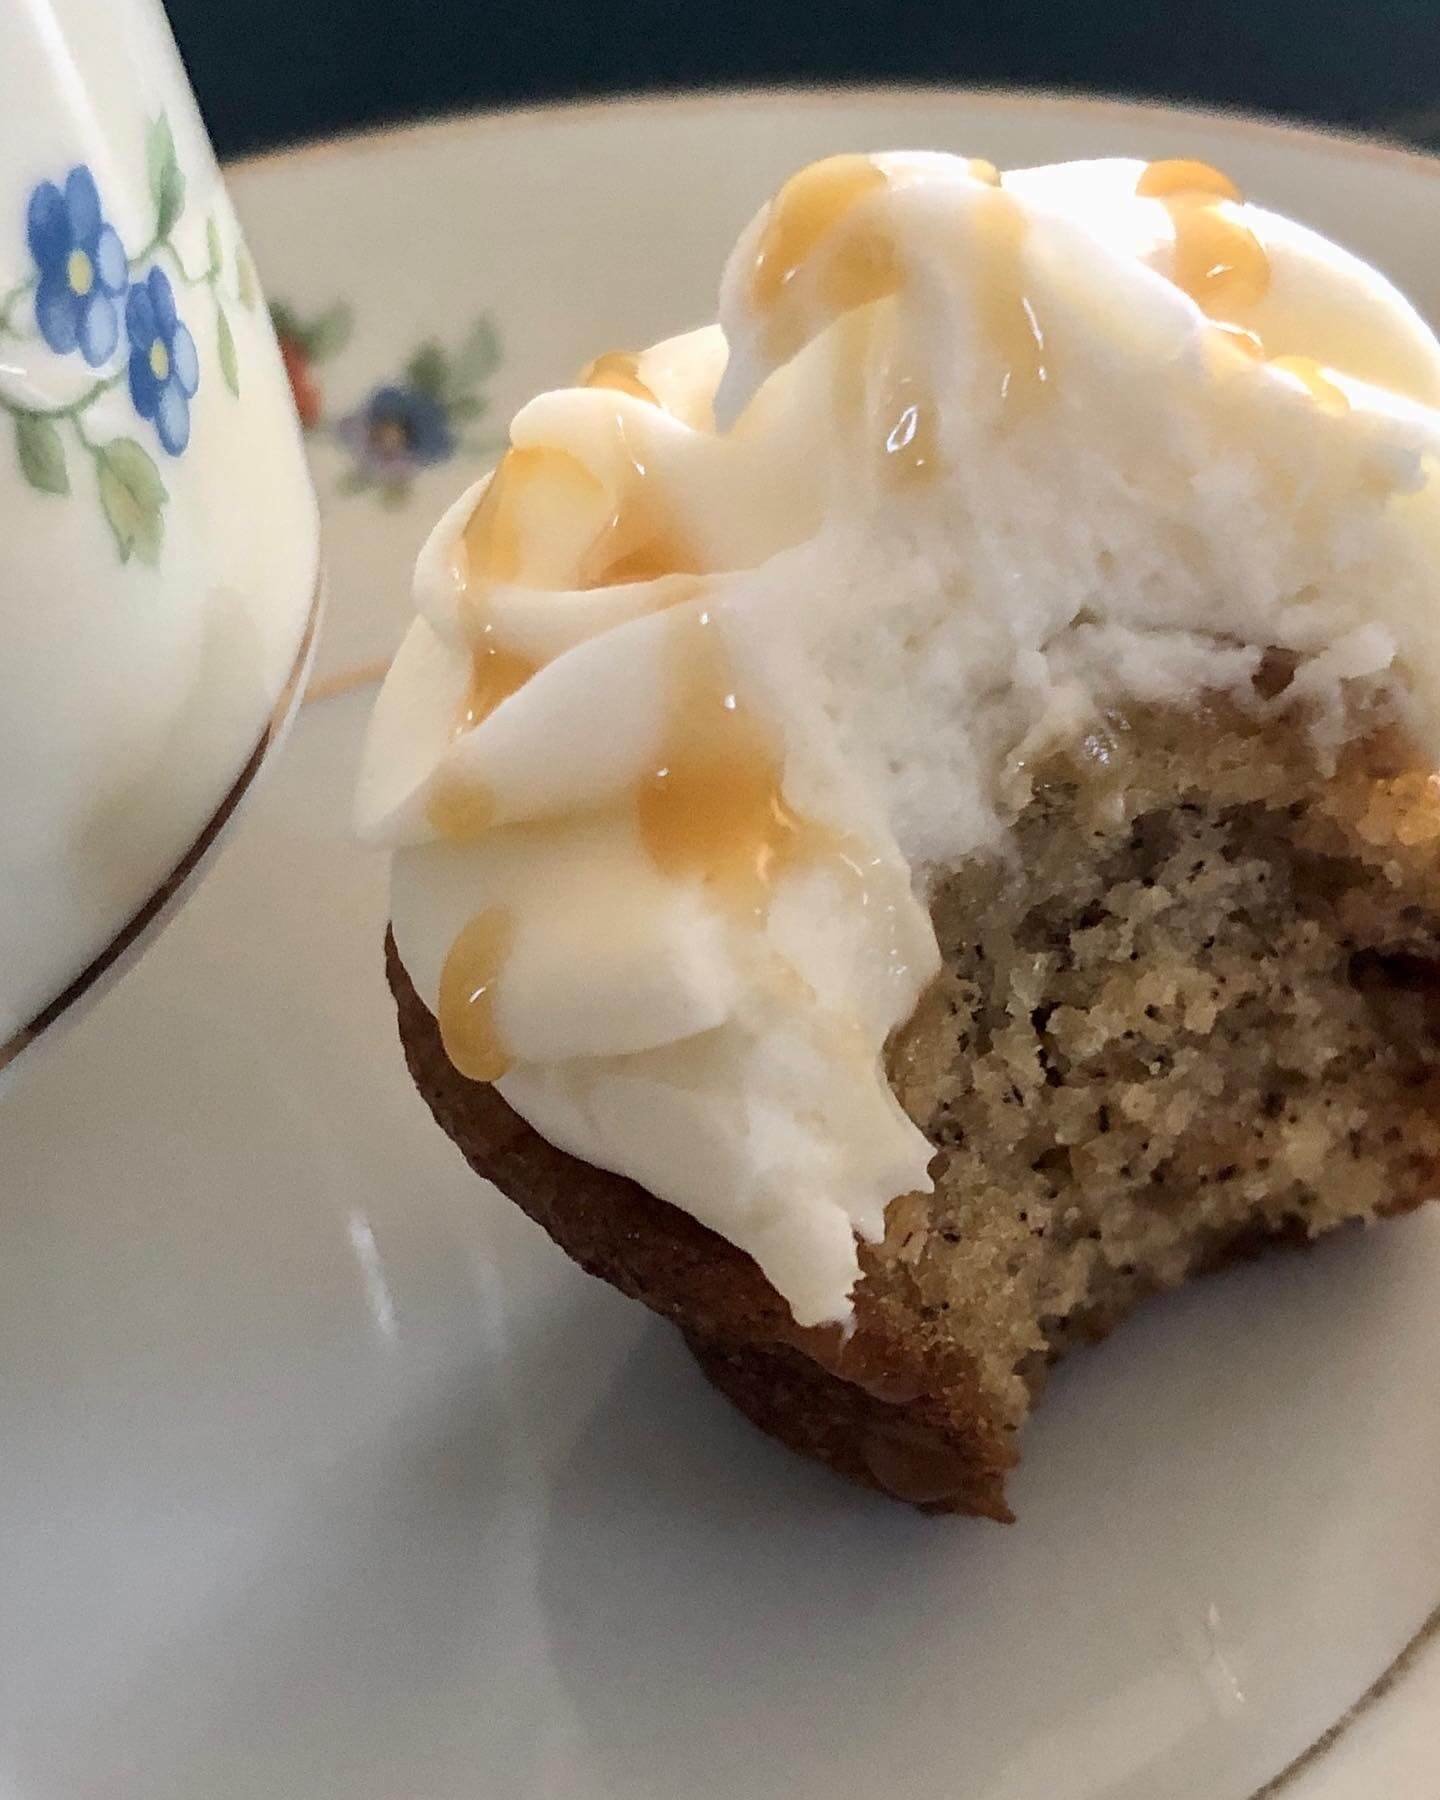 tasty treat, mini banana cupcake with cream cheese frosting and caramel